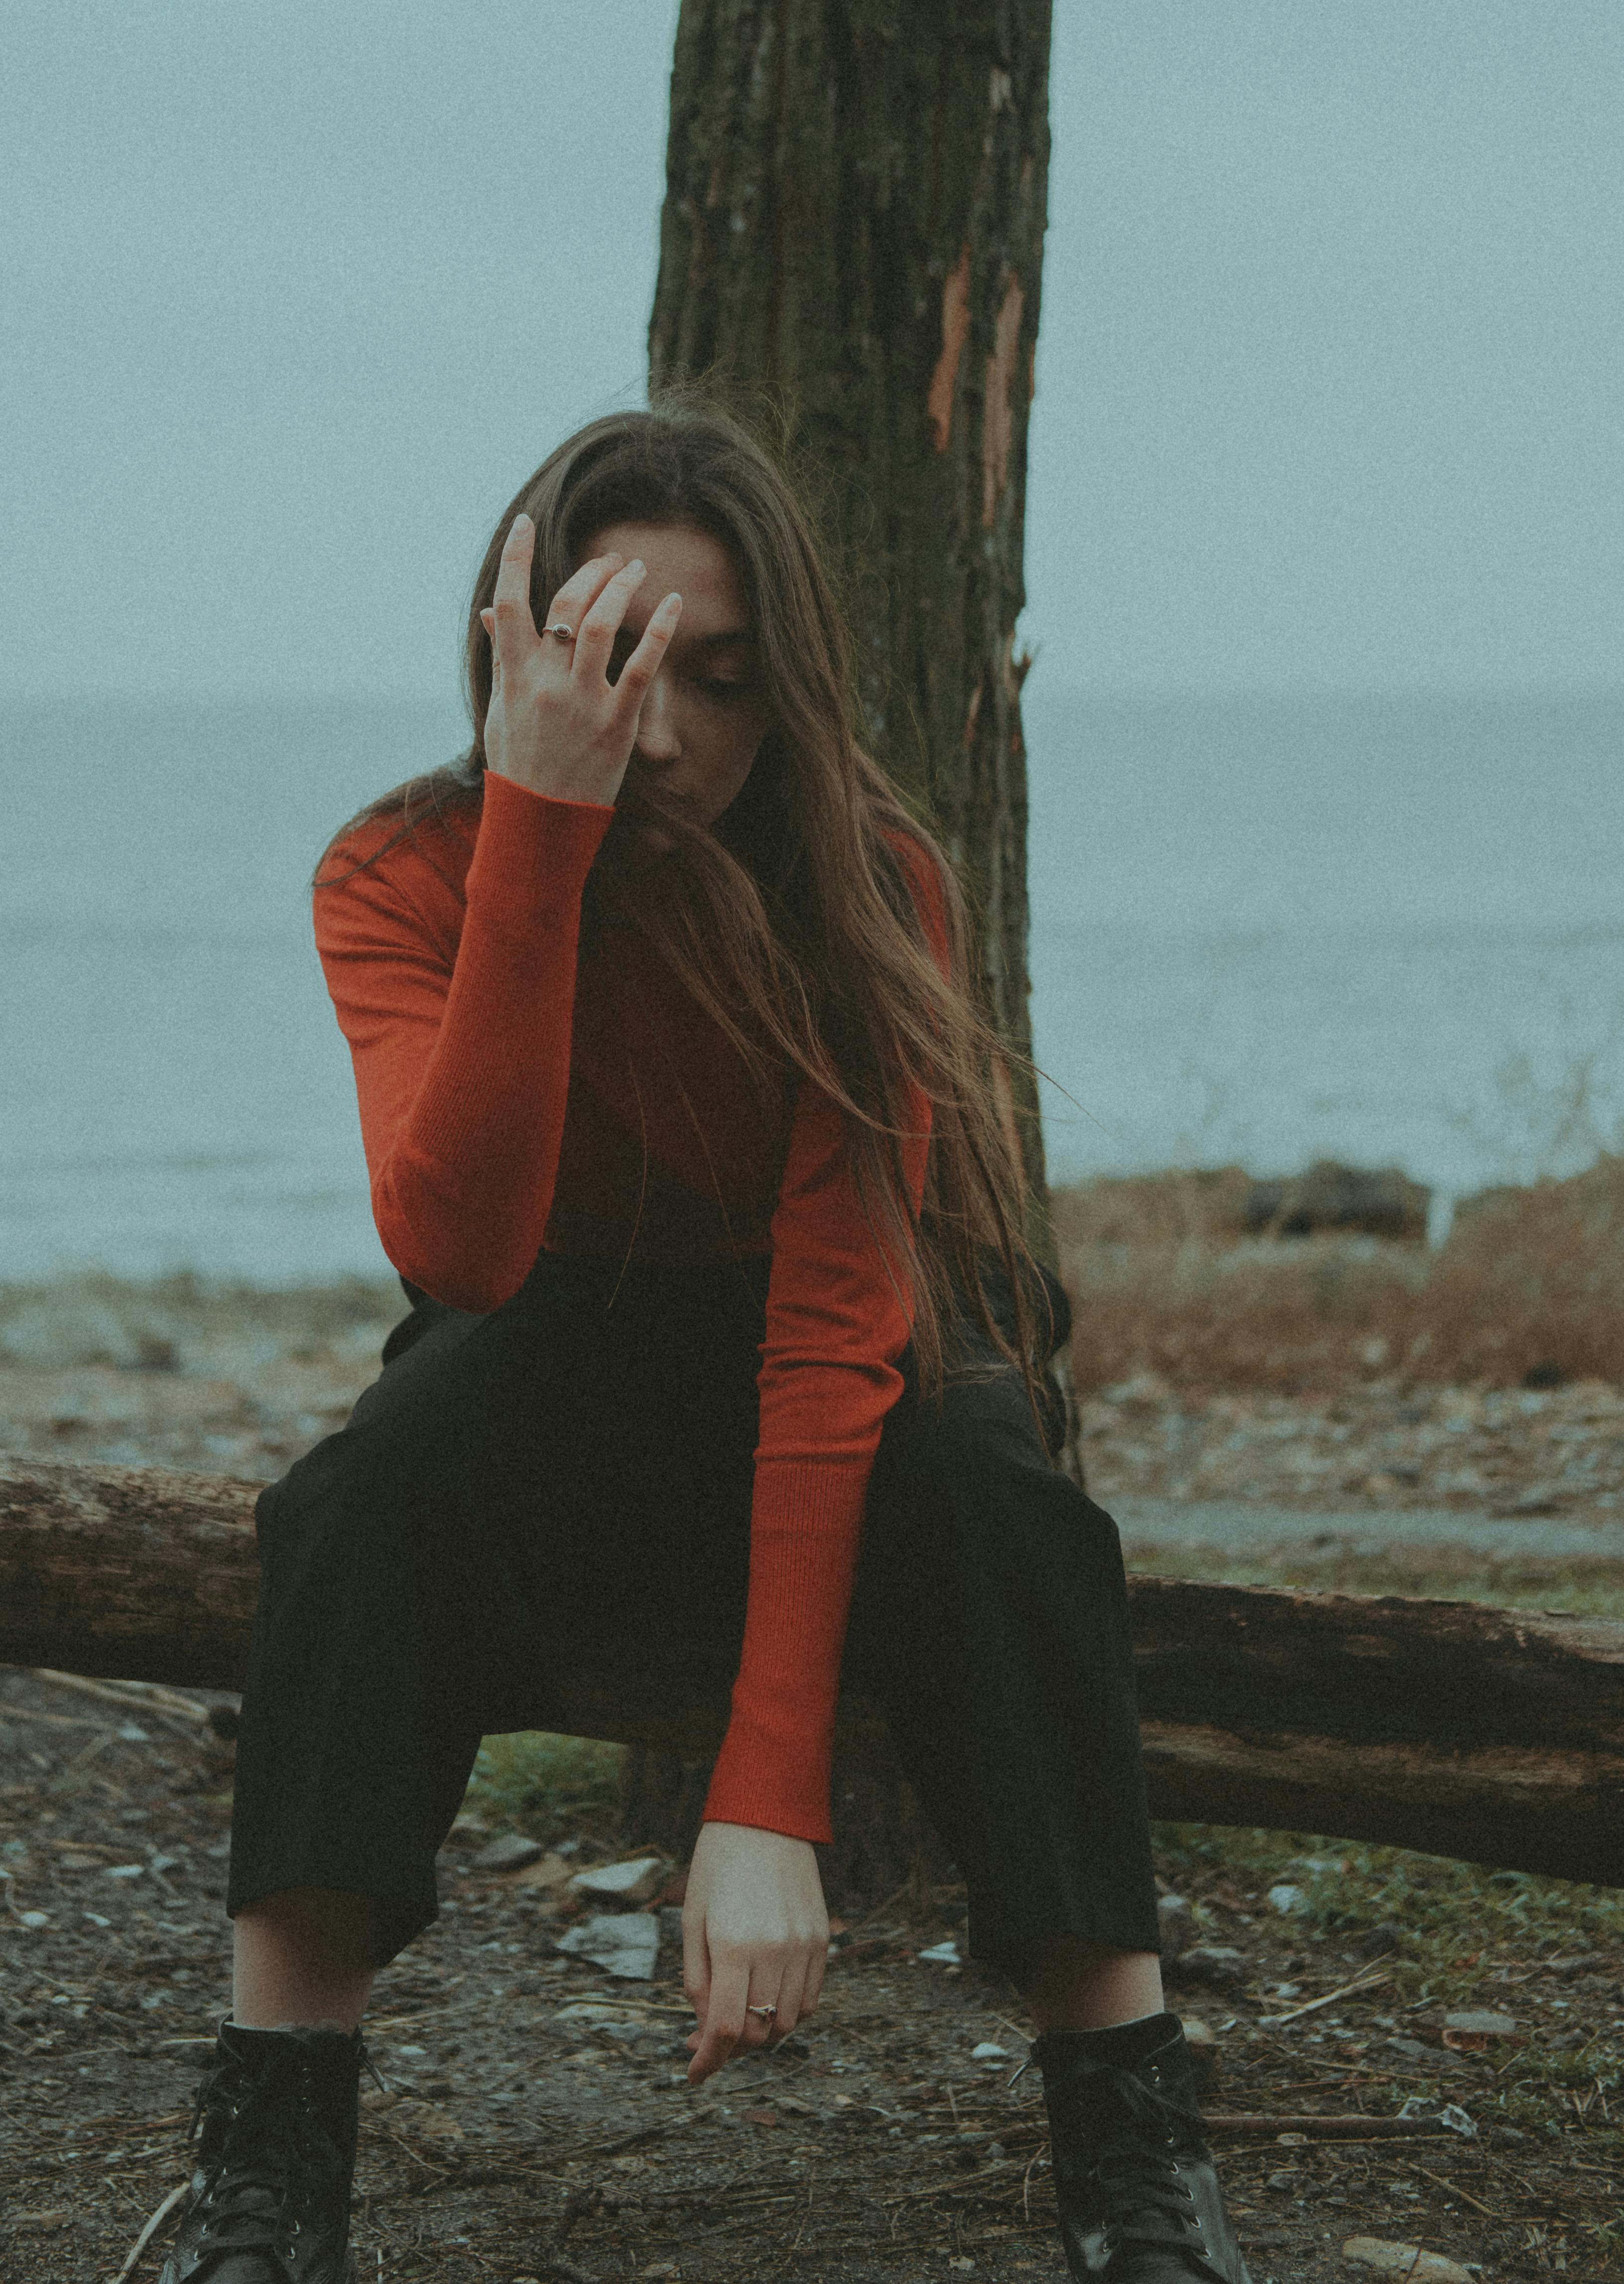 Smiling woman wearing red sweater and black pants photo  Free Sweater  Image on Unsplash